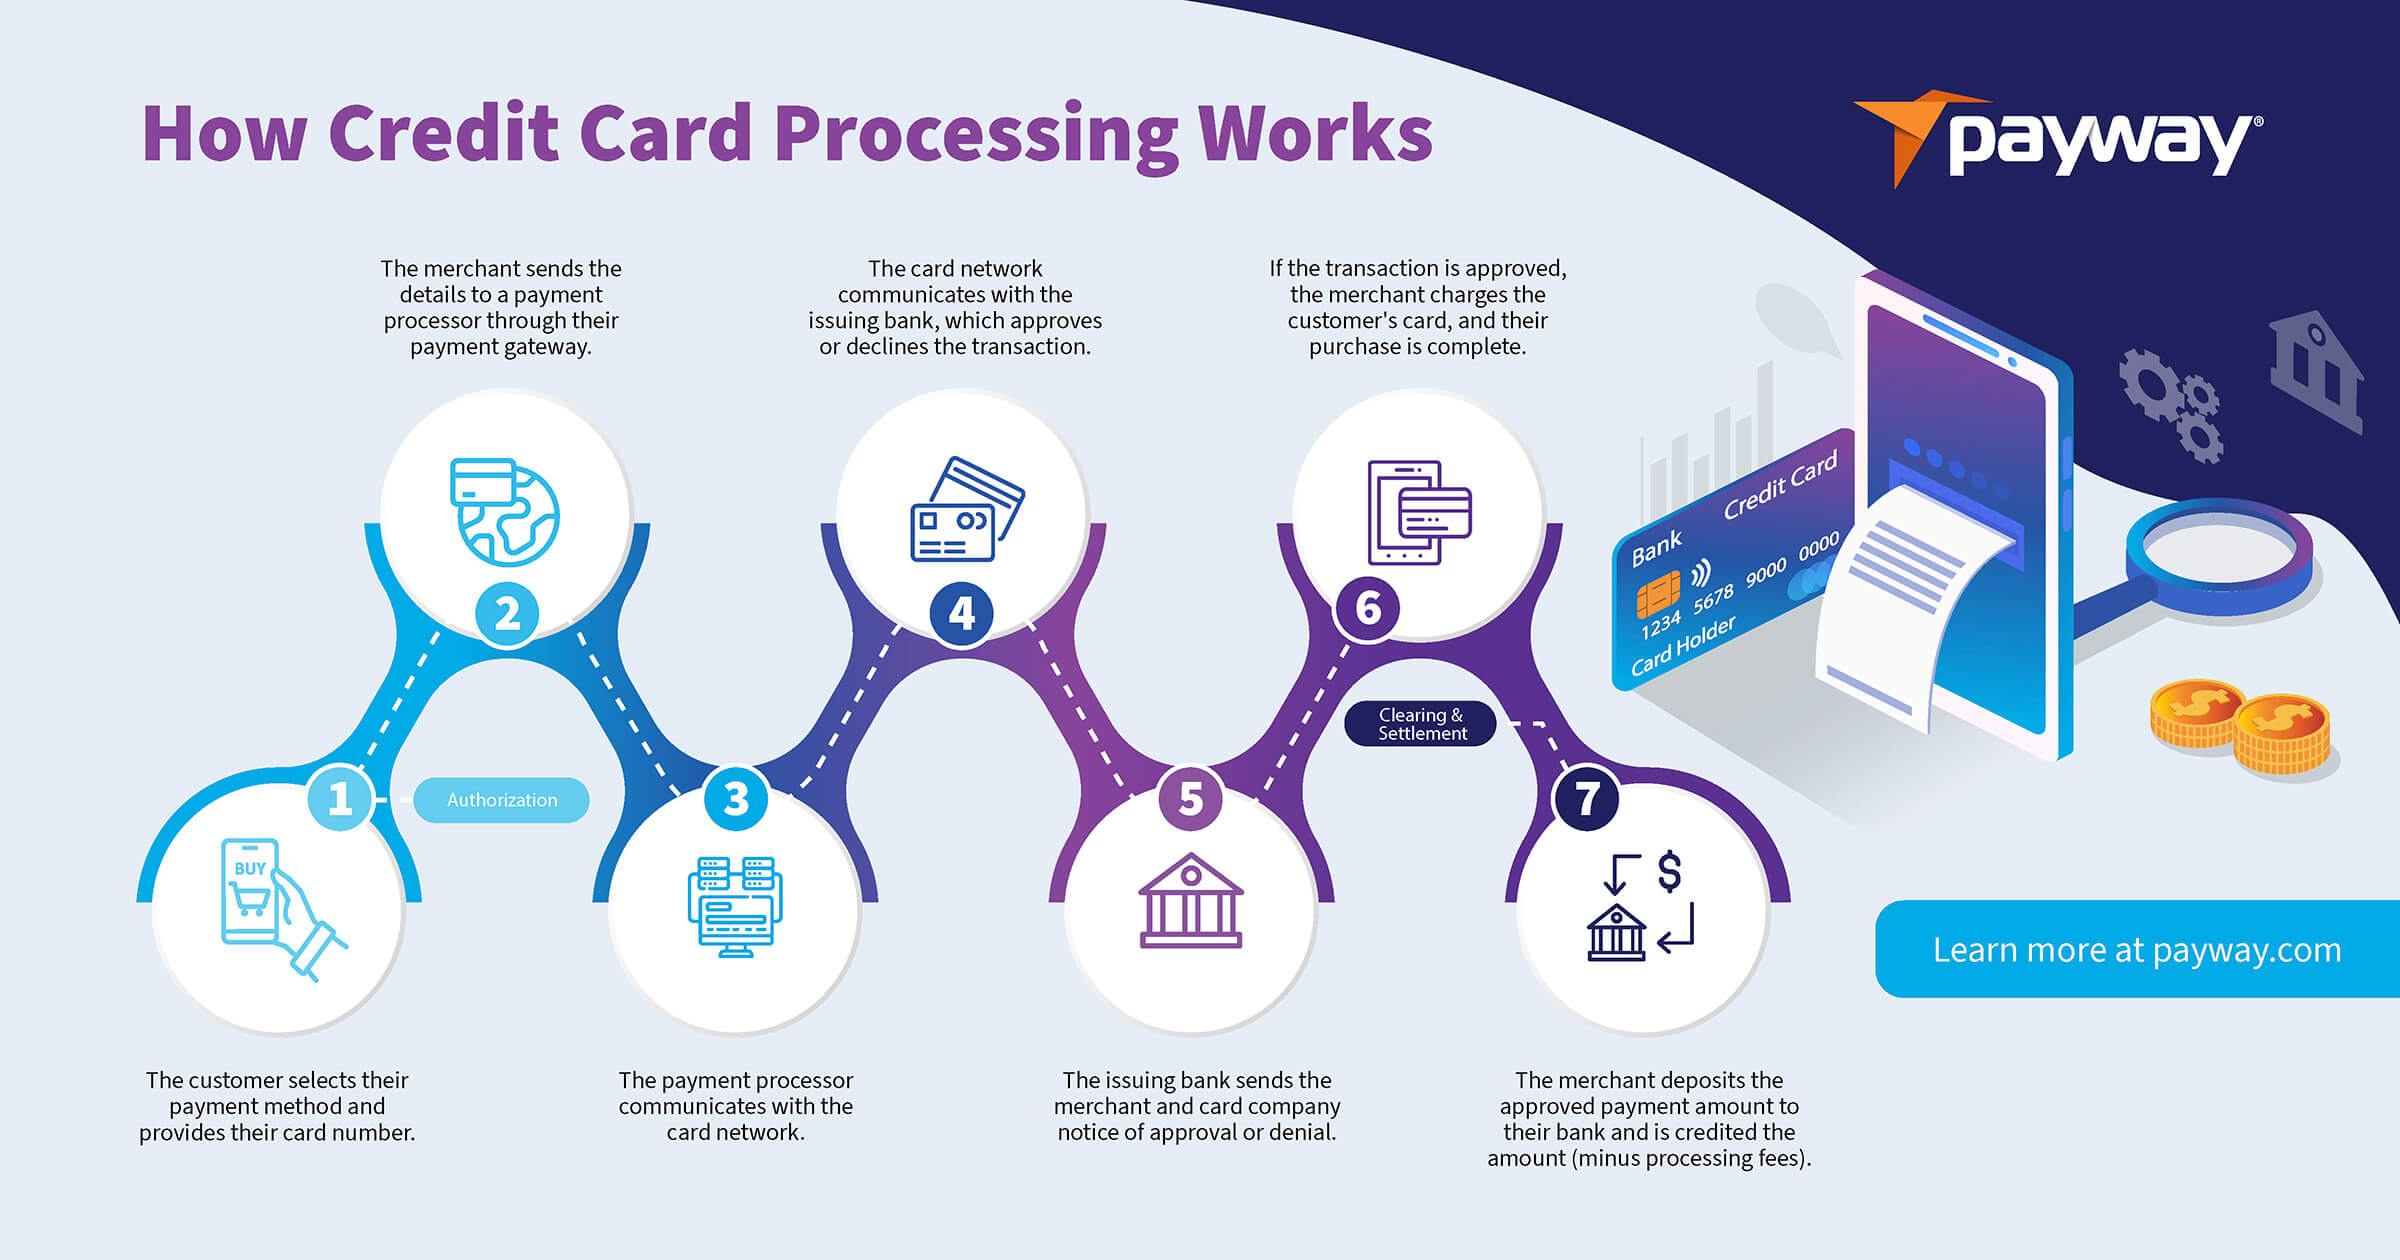 How Credit Card Processing Works Infographic